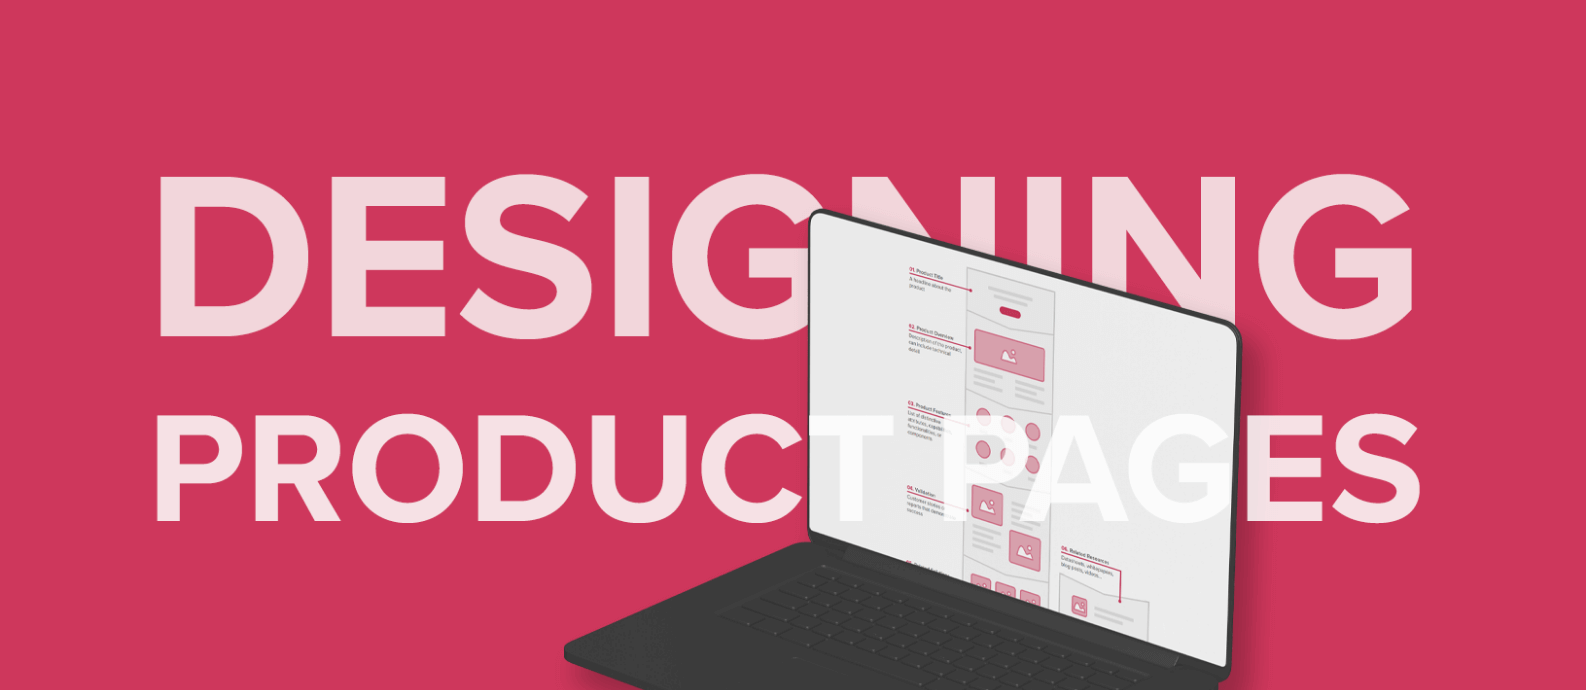 designing-product-pages